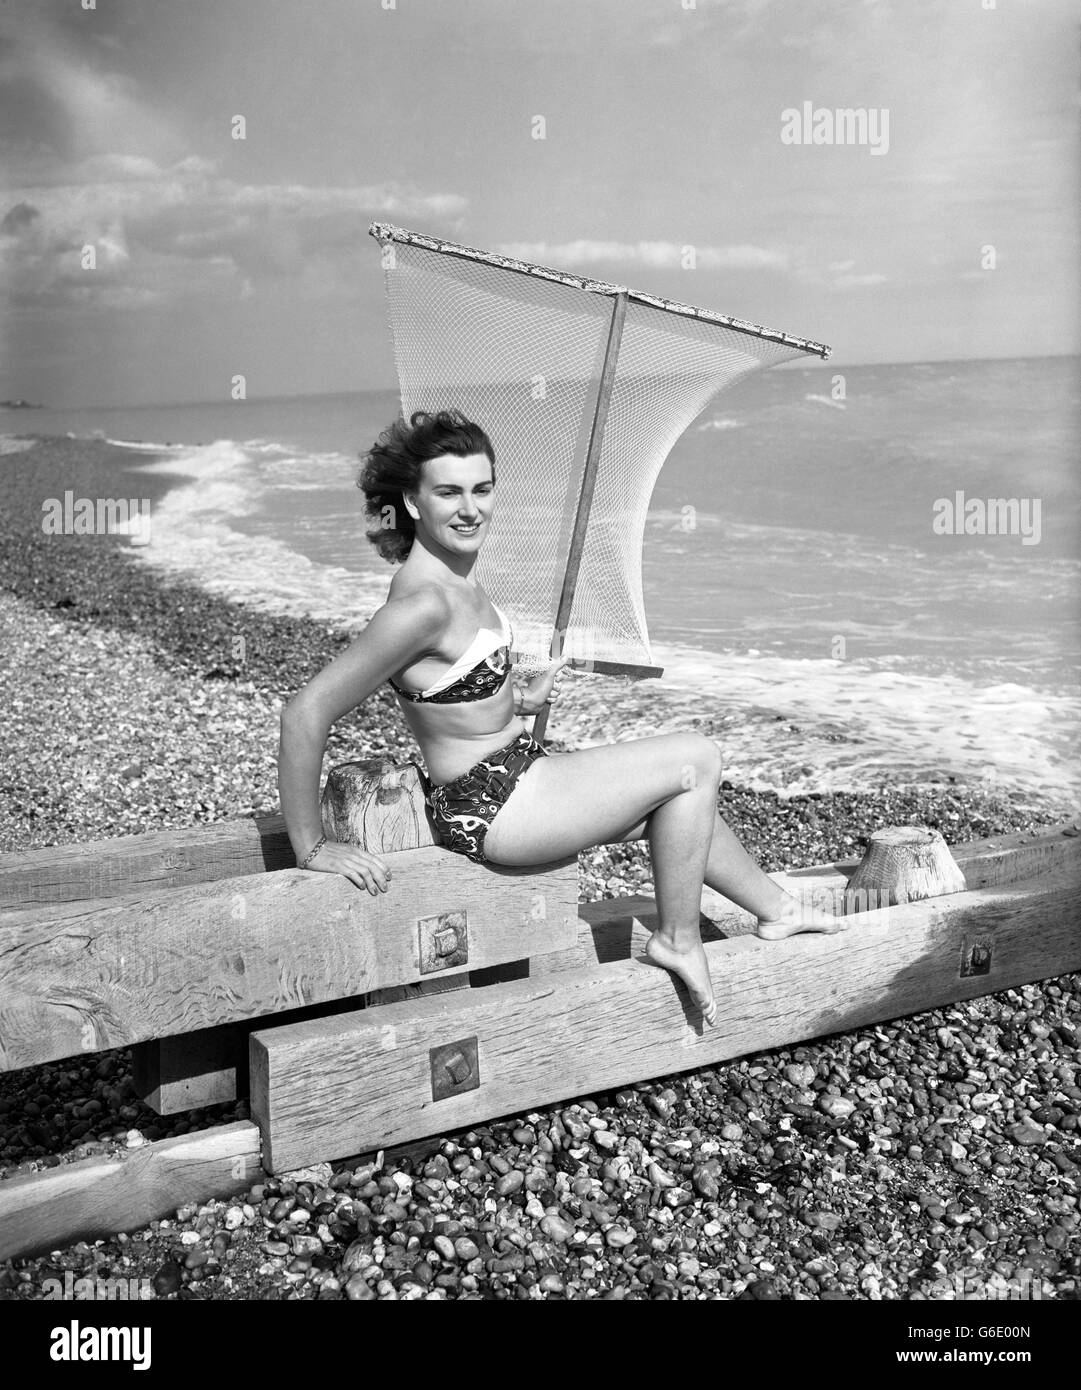 22-year-old Joan Knight strikes a pose on Cooden beach in Bexhill, Sussex. Stock Photo